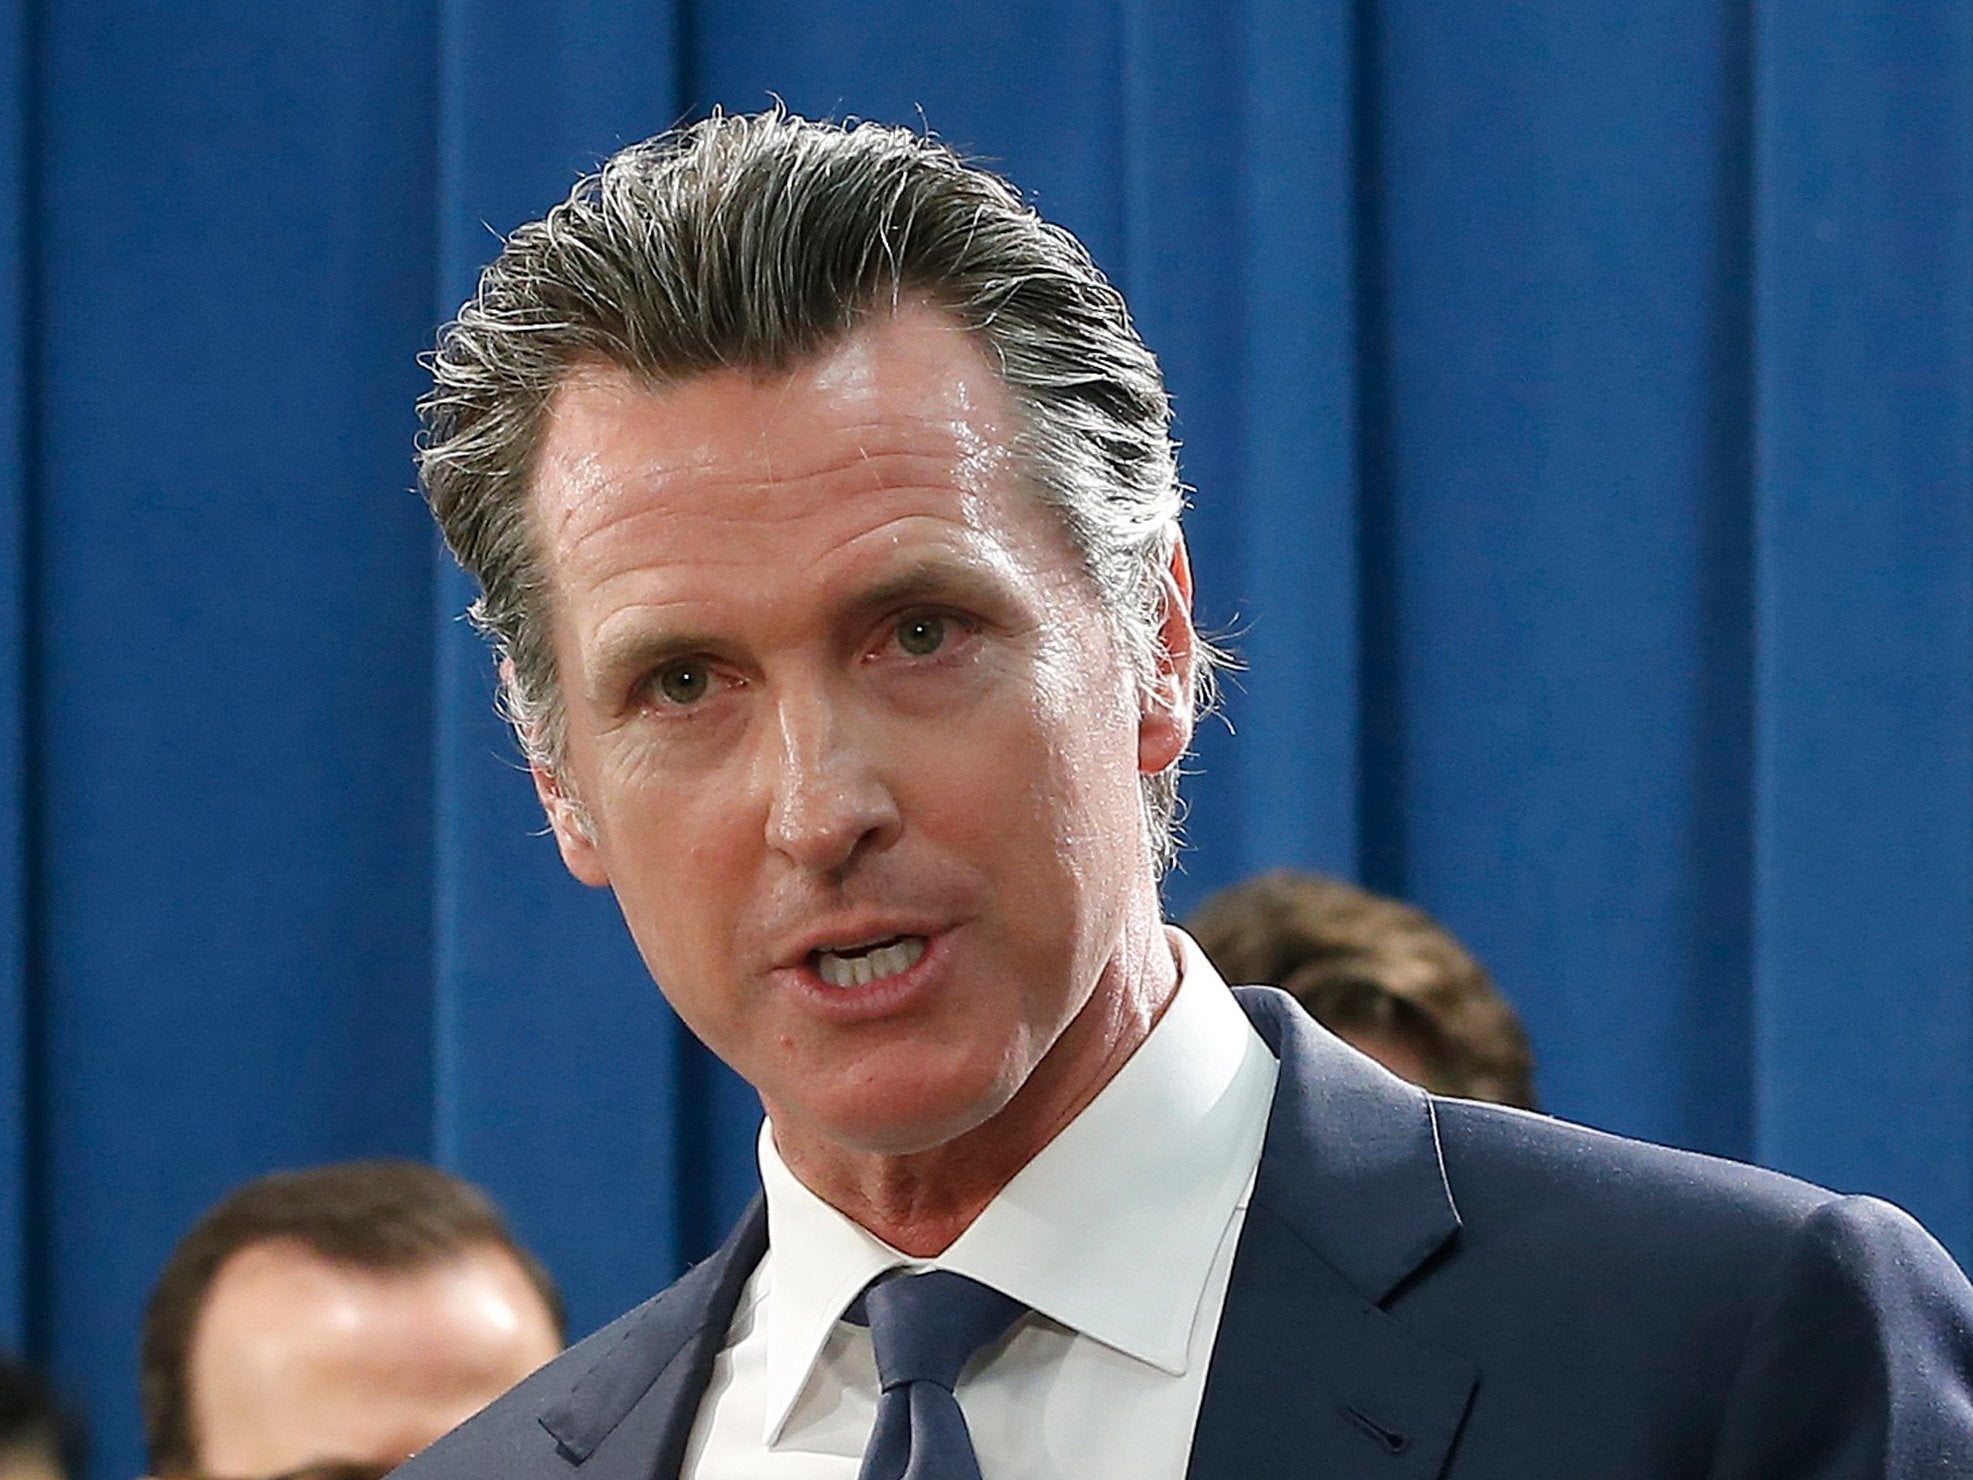 Newsom described the legislation as 'a solution in search of a problem'